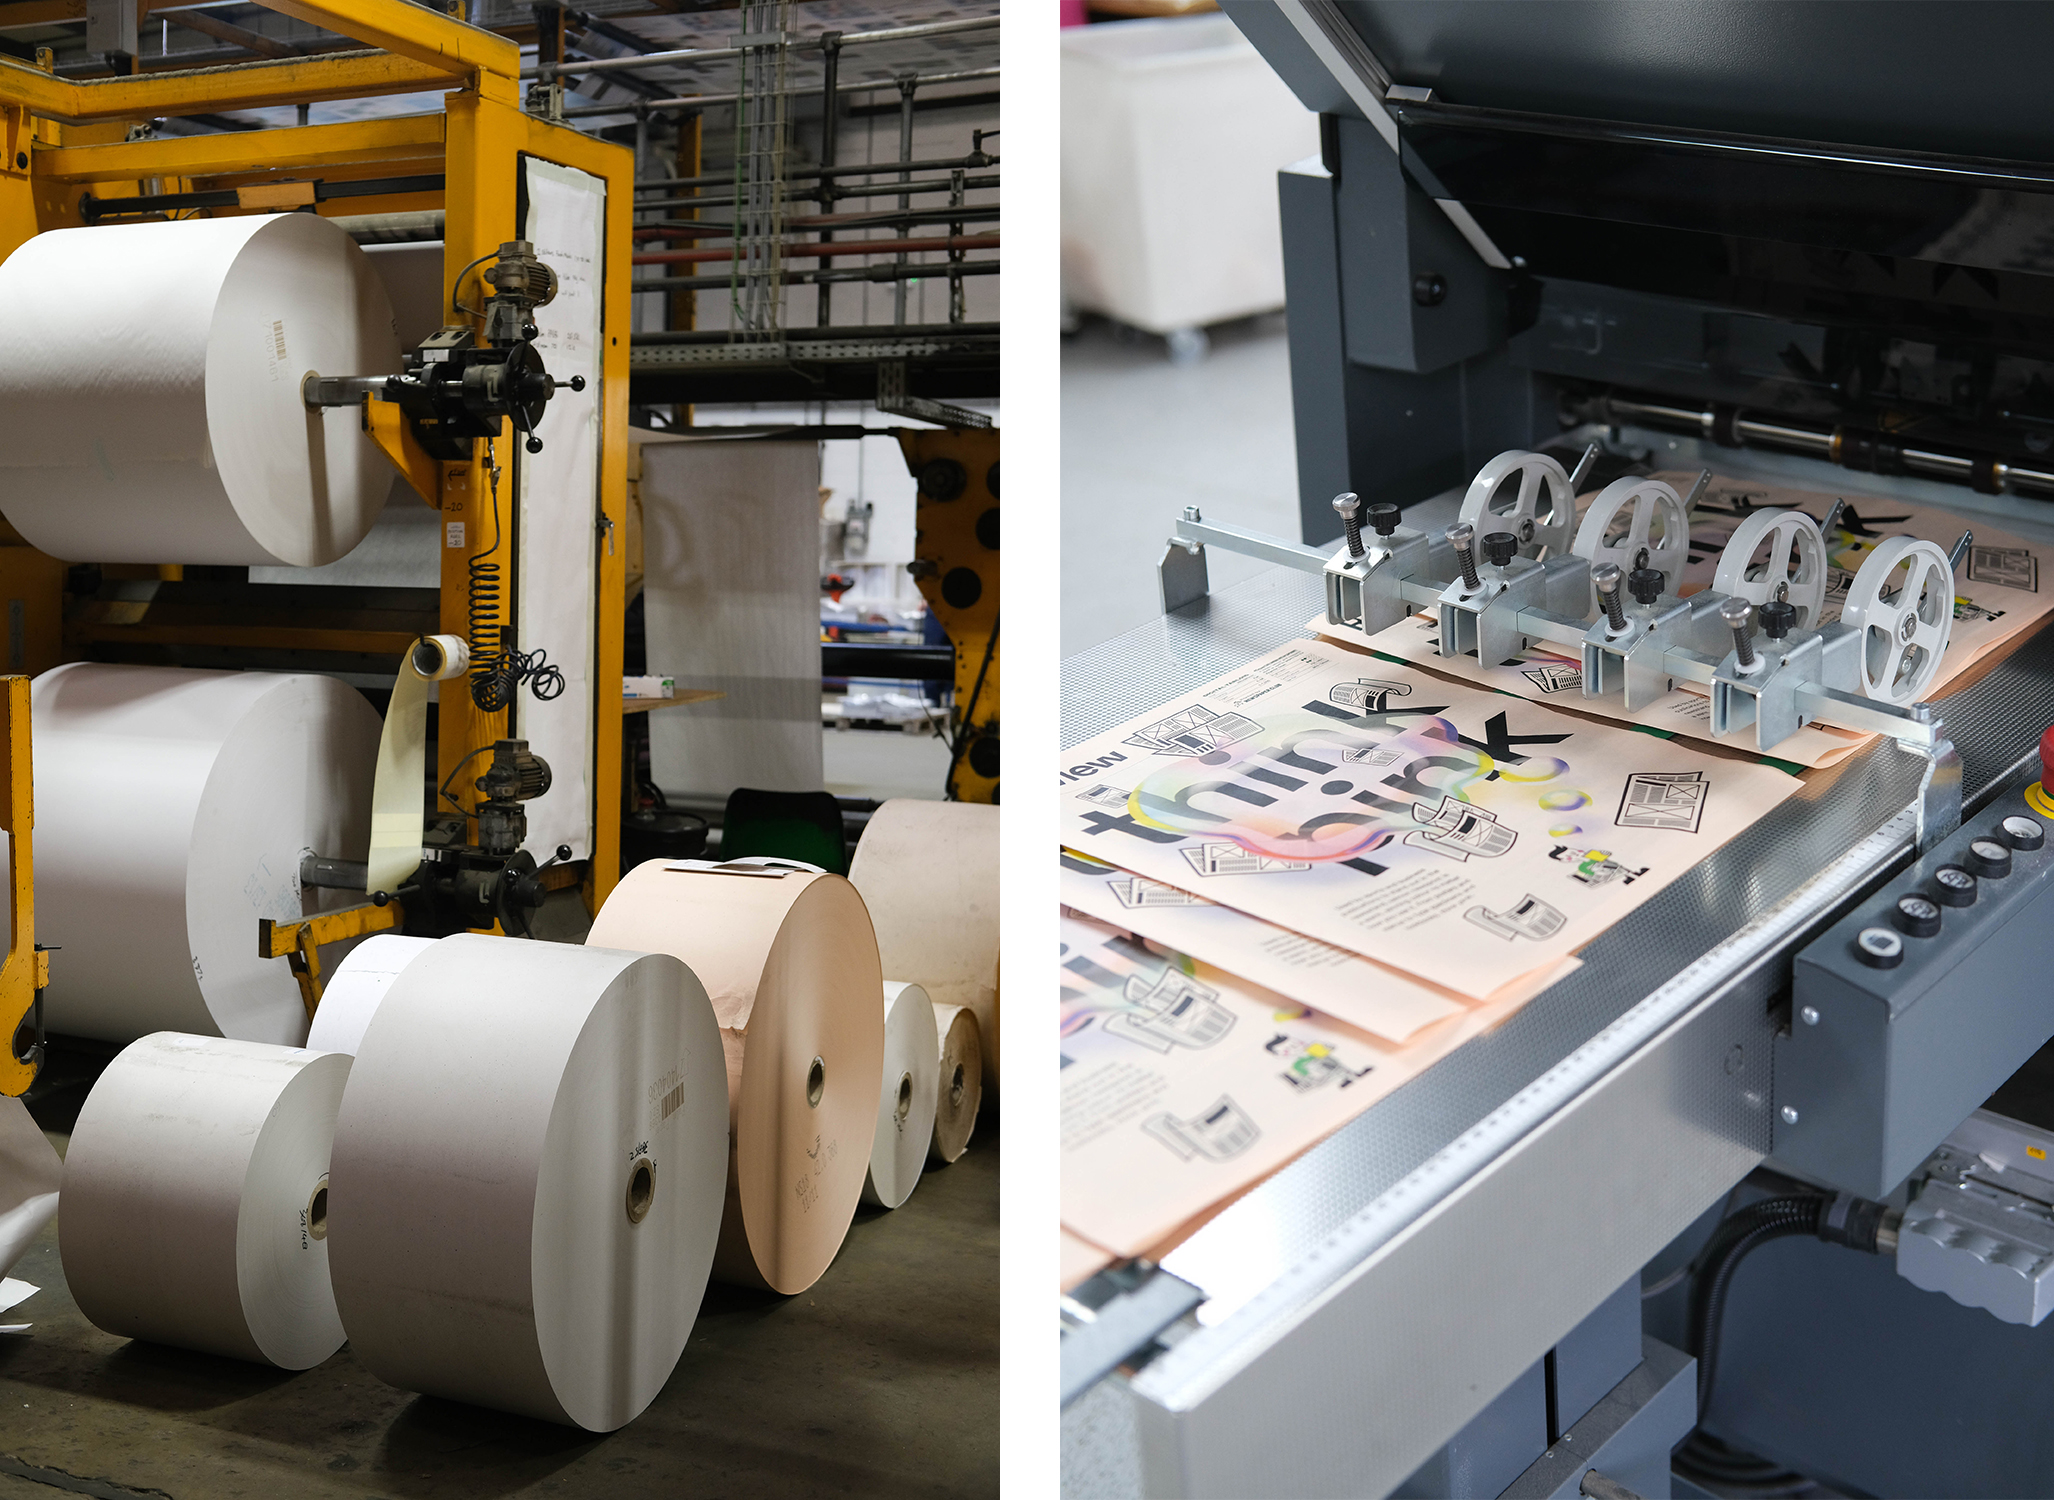 Two images of the Newspaper Club printing press. Image on left shows several large reels of newsprint in a warehouse. Image on right shows tabloid newspapers emerging from a printer. Text on the front page of the newspapers reads: "Think Pink"